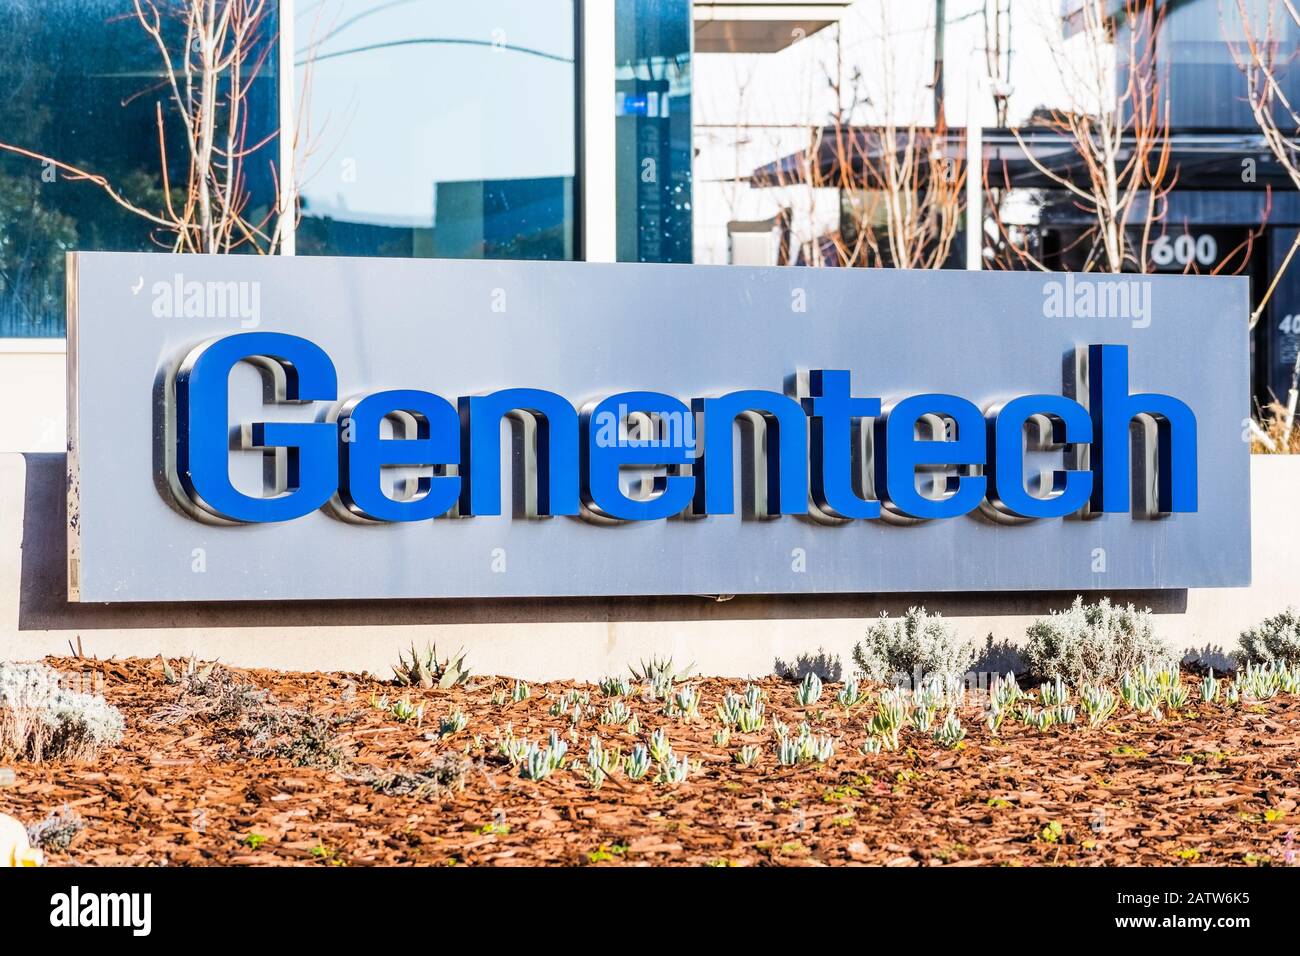 Feb 2, 2020 South San Francisco / CA / USA - Genentech sign at the headquarters in Silicon Valley; Genentech, Inc., is an American biotechnology corpo Stock Photo